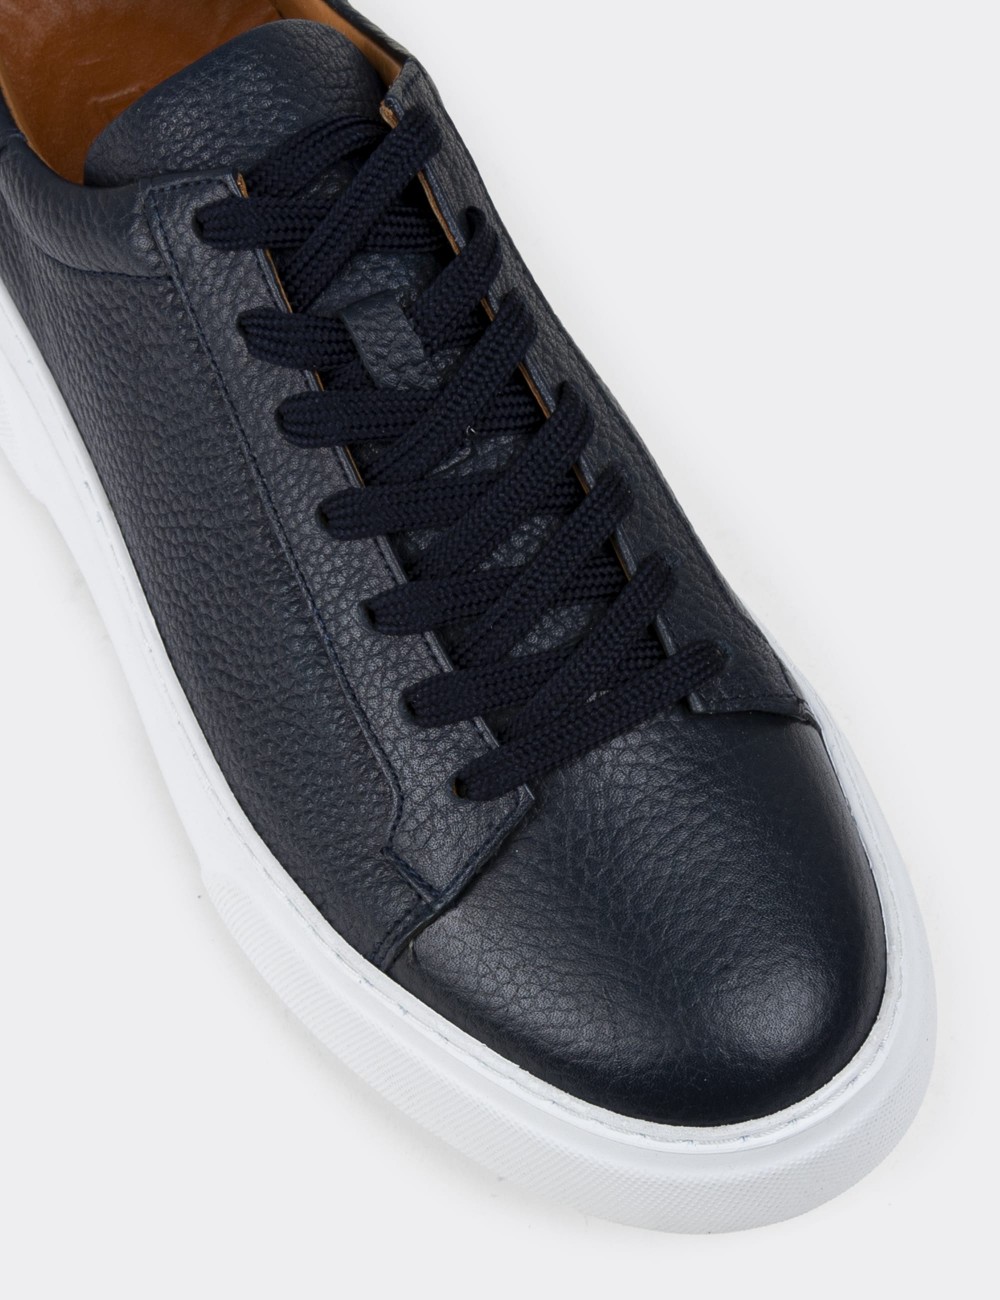 Navy Leather Sneakers - M2501MLCVP01